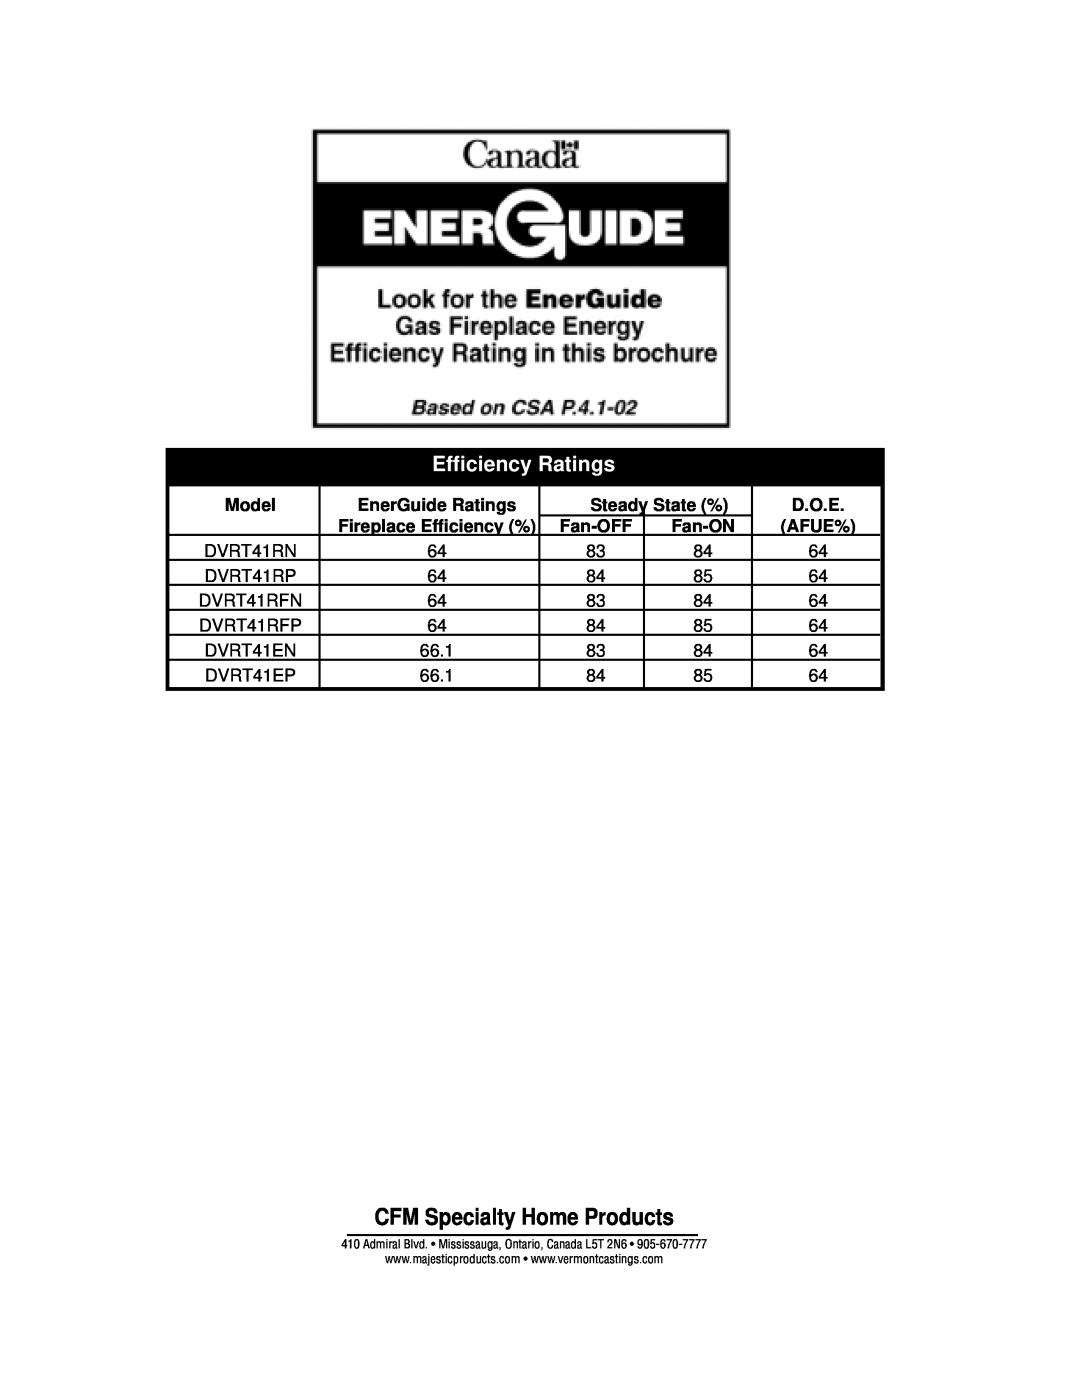 Vermont Casting DVRT41 Efficiency Ratings, CFM Specialty Home Products, Model, EnerGuide Ratings, State %, D.O.E, Fan-OFF 